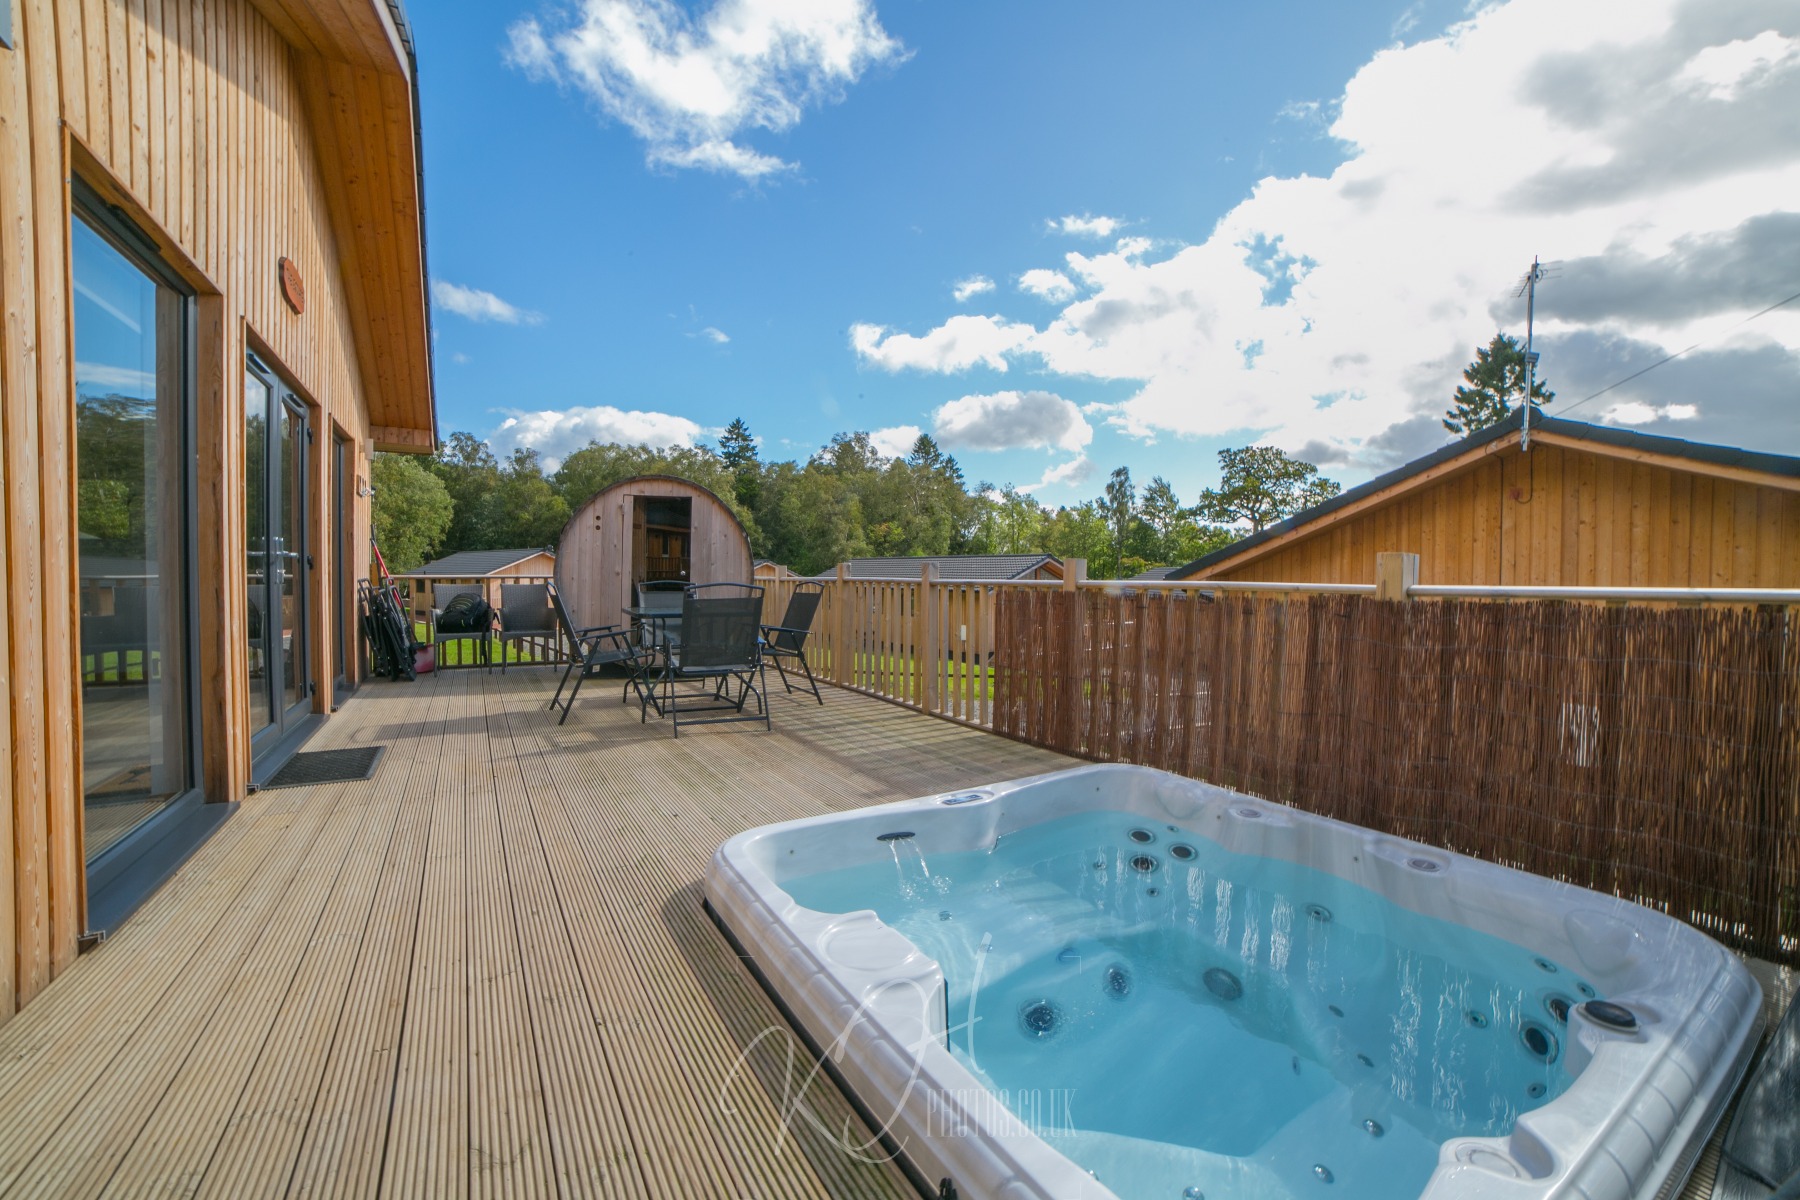 Hot Tub Holidays in the Northumberland National Park